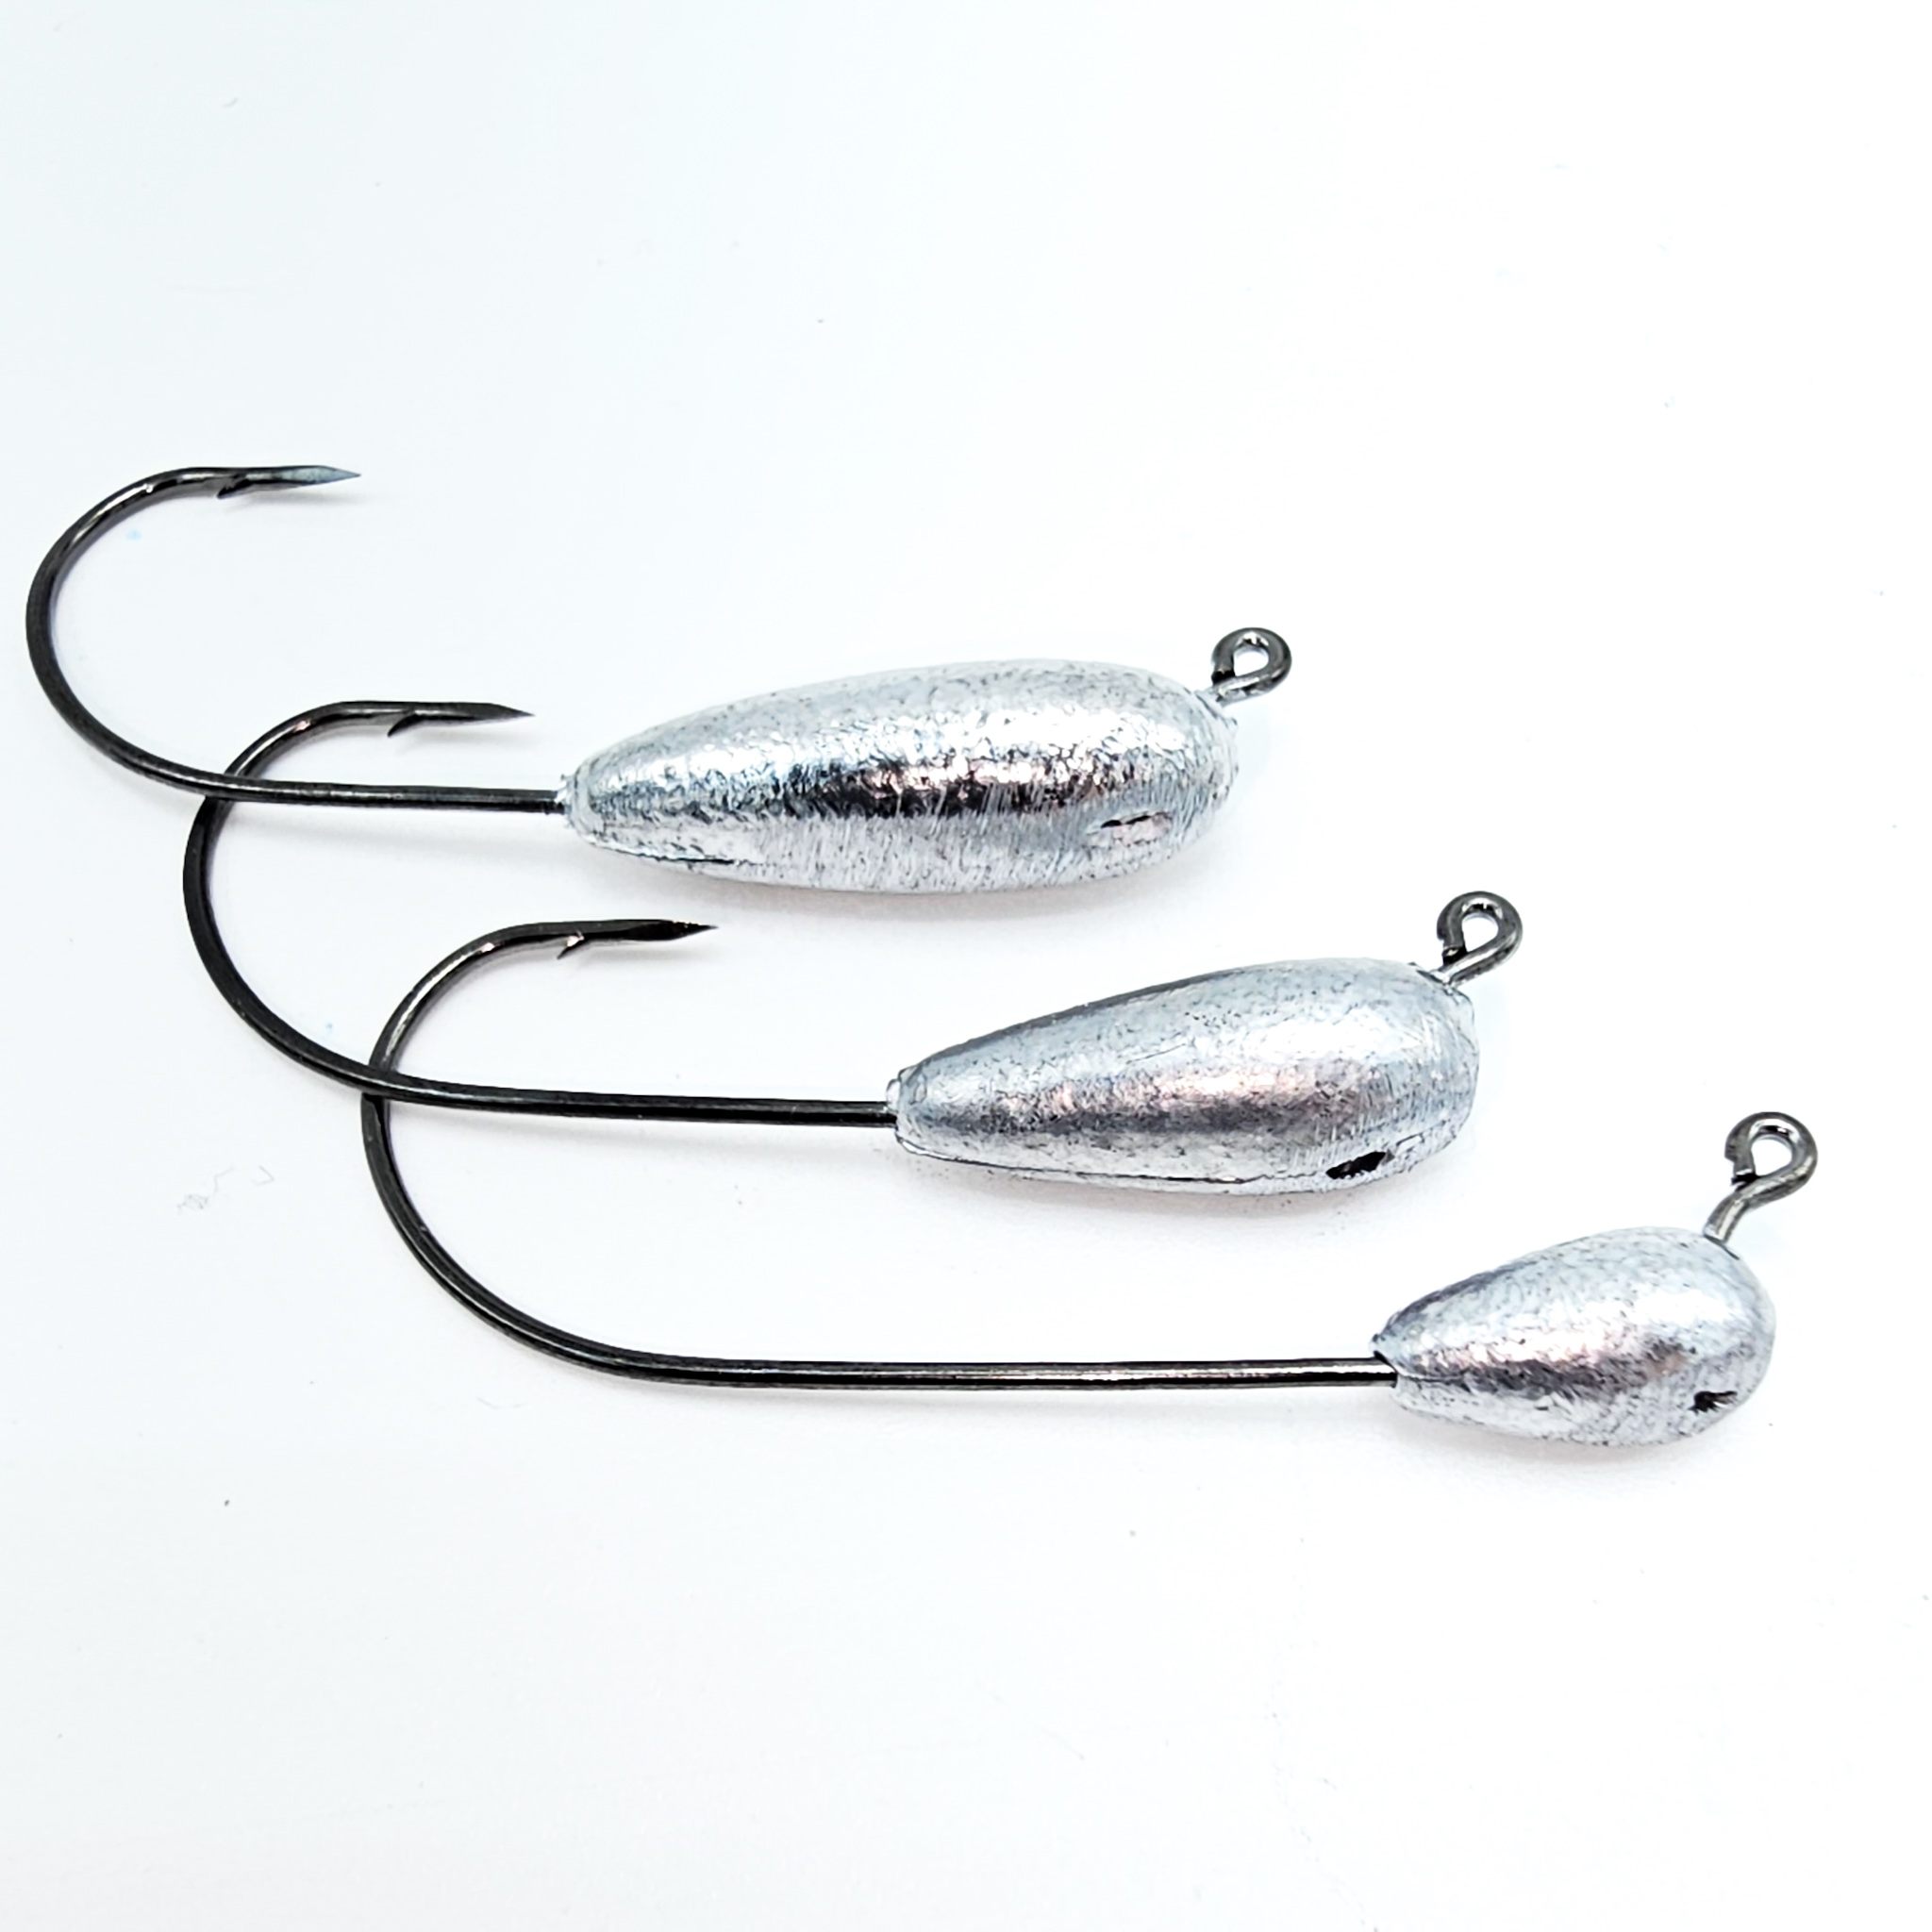 Standard 60° Light Wire Tube Jig Head - Imperfects - GSO Fishing